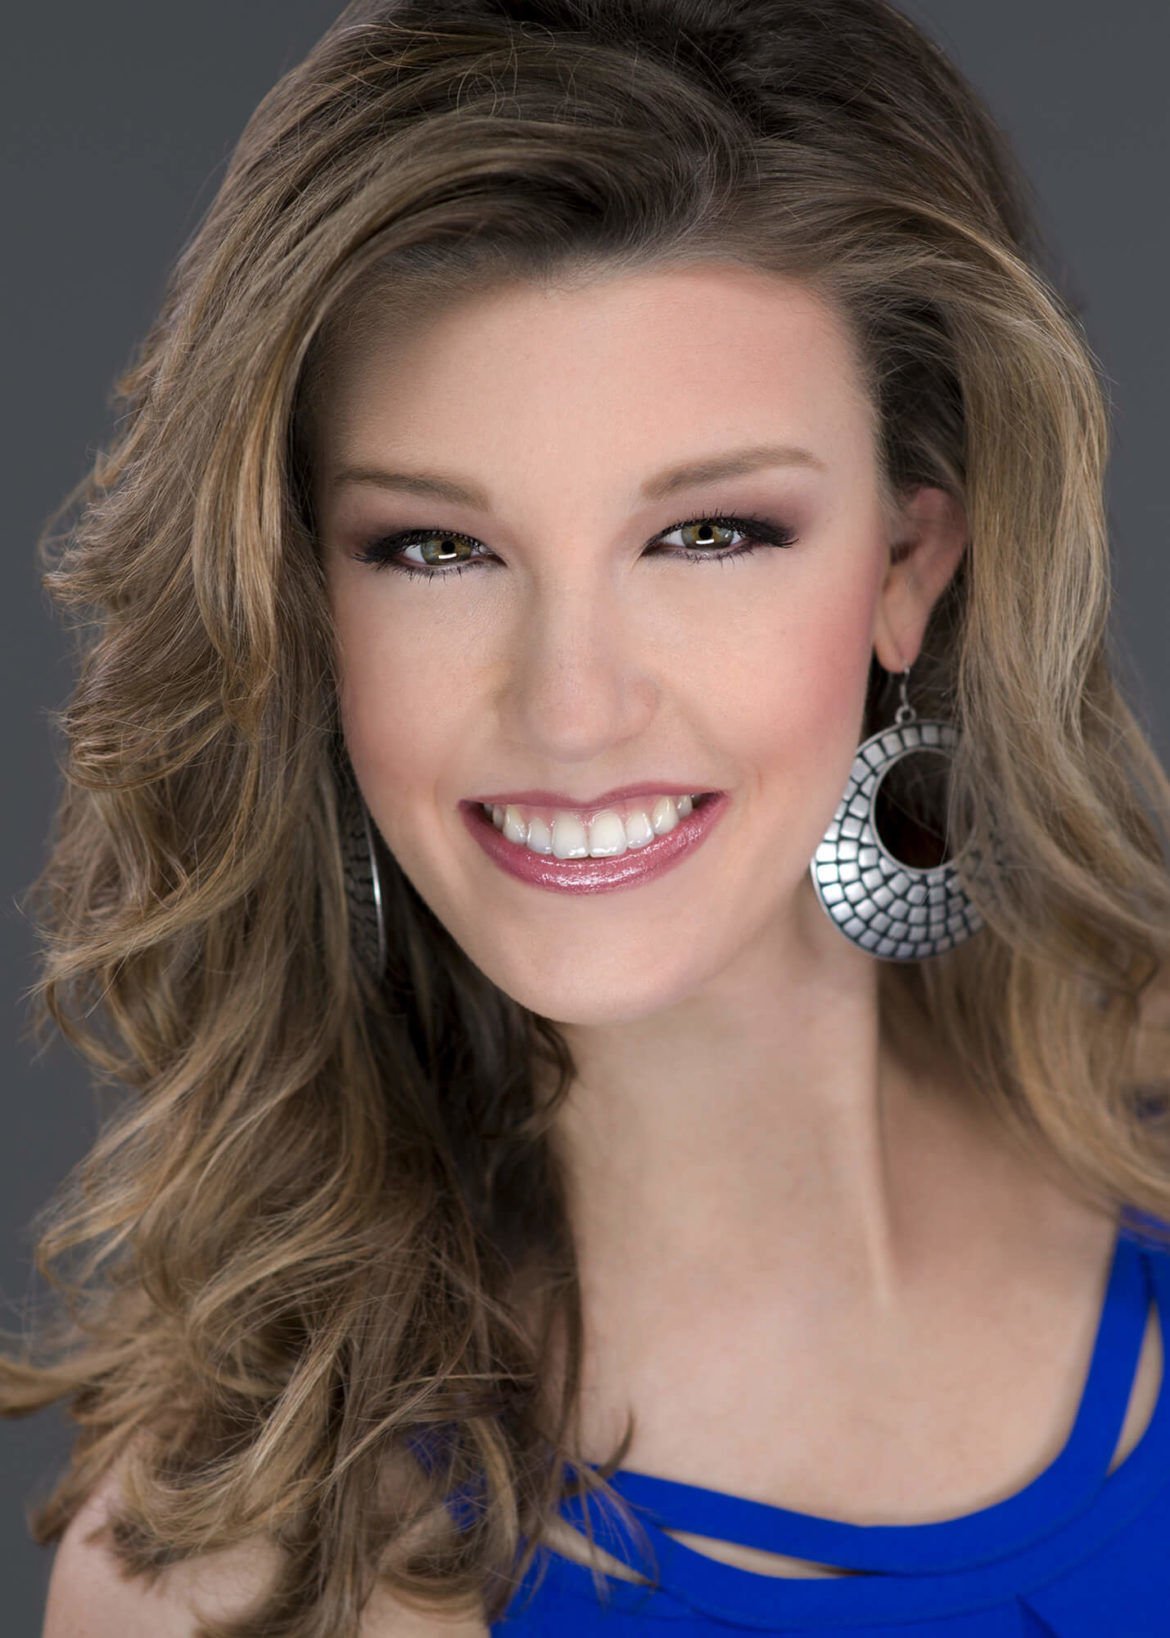 Photo gallery: Meet the 2017 Miss Oklahoma contestants vying to be ...